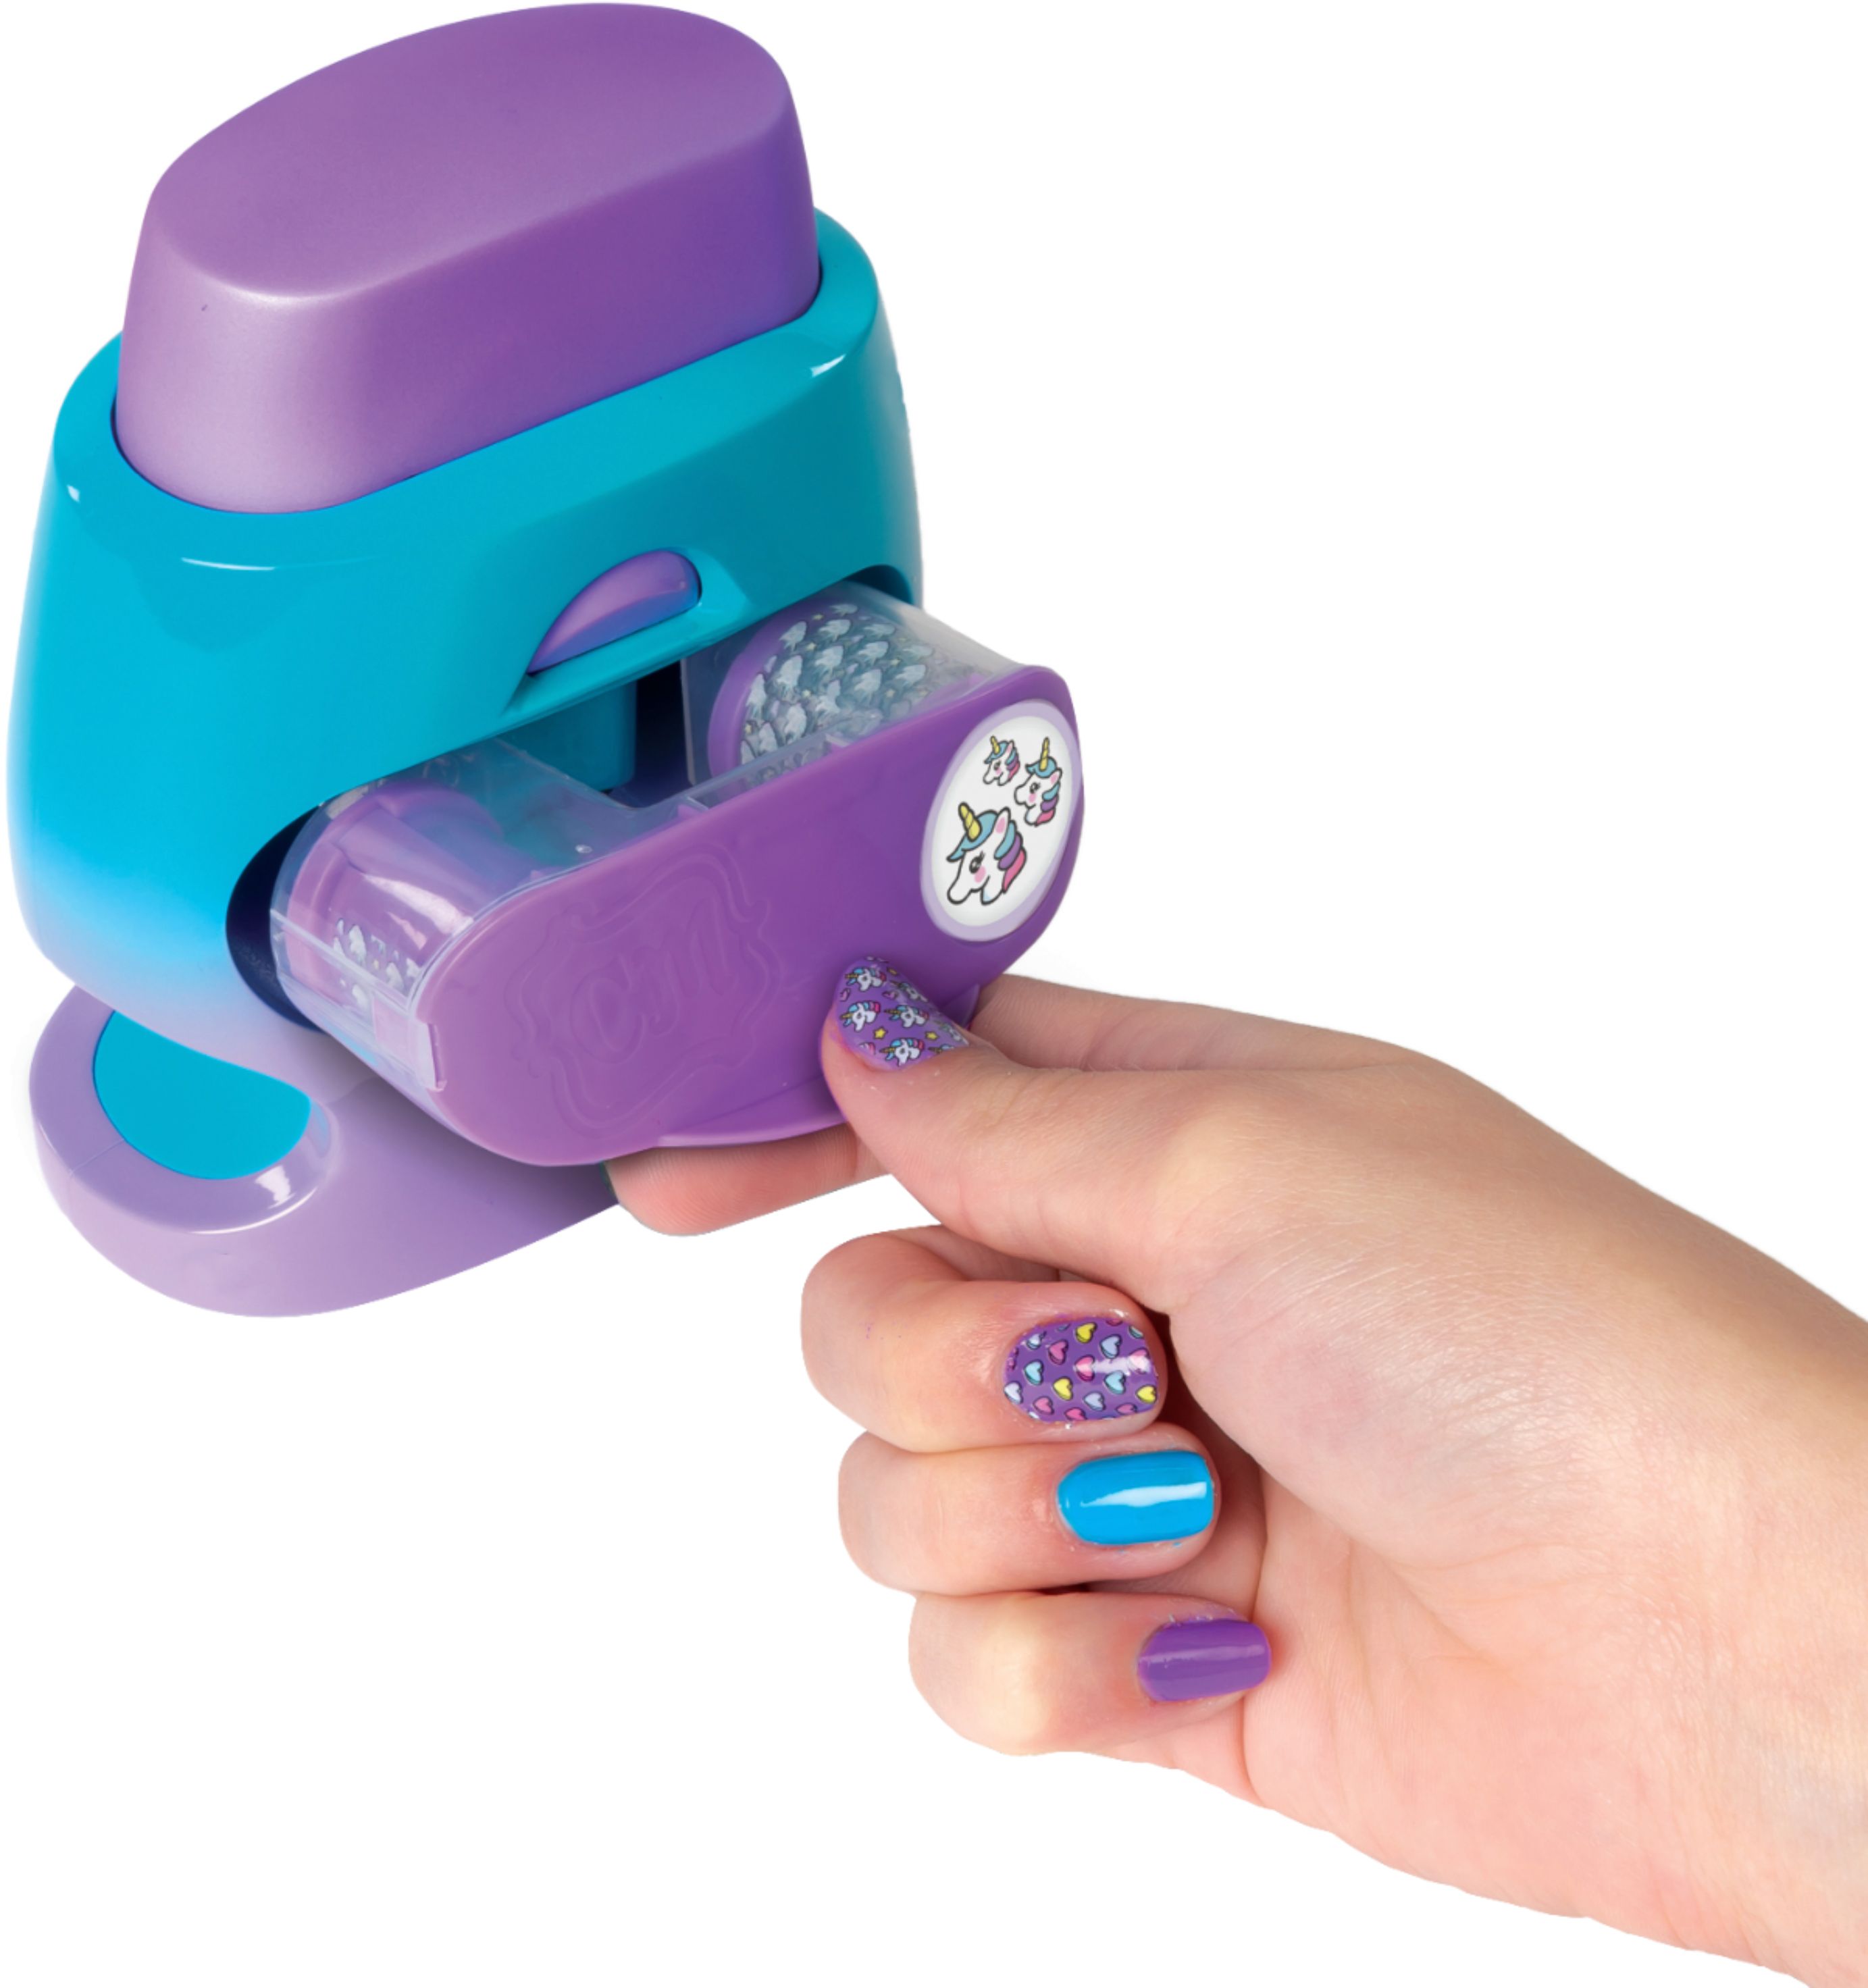 Tantrums To Smiles: Go Glam Nail Stamper **REVIEW**